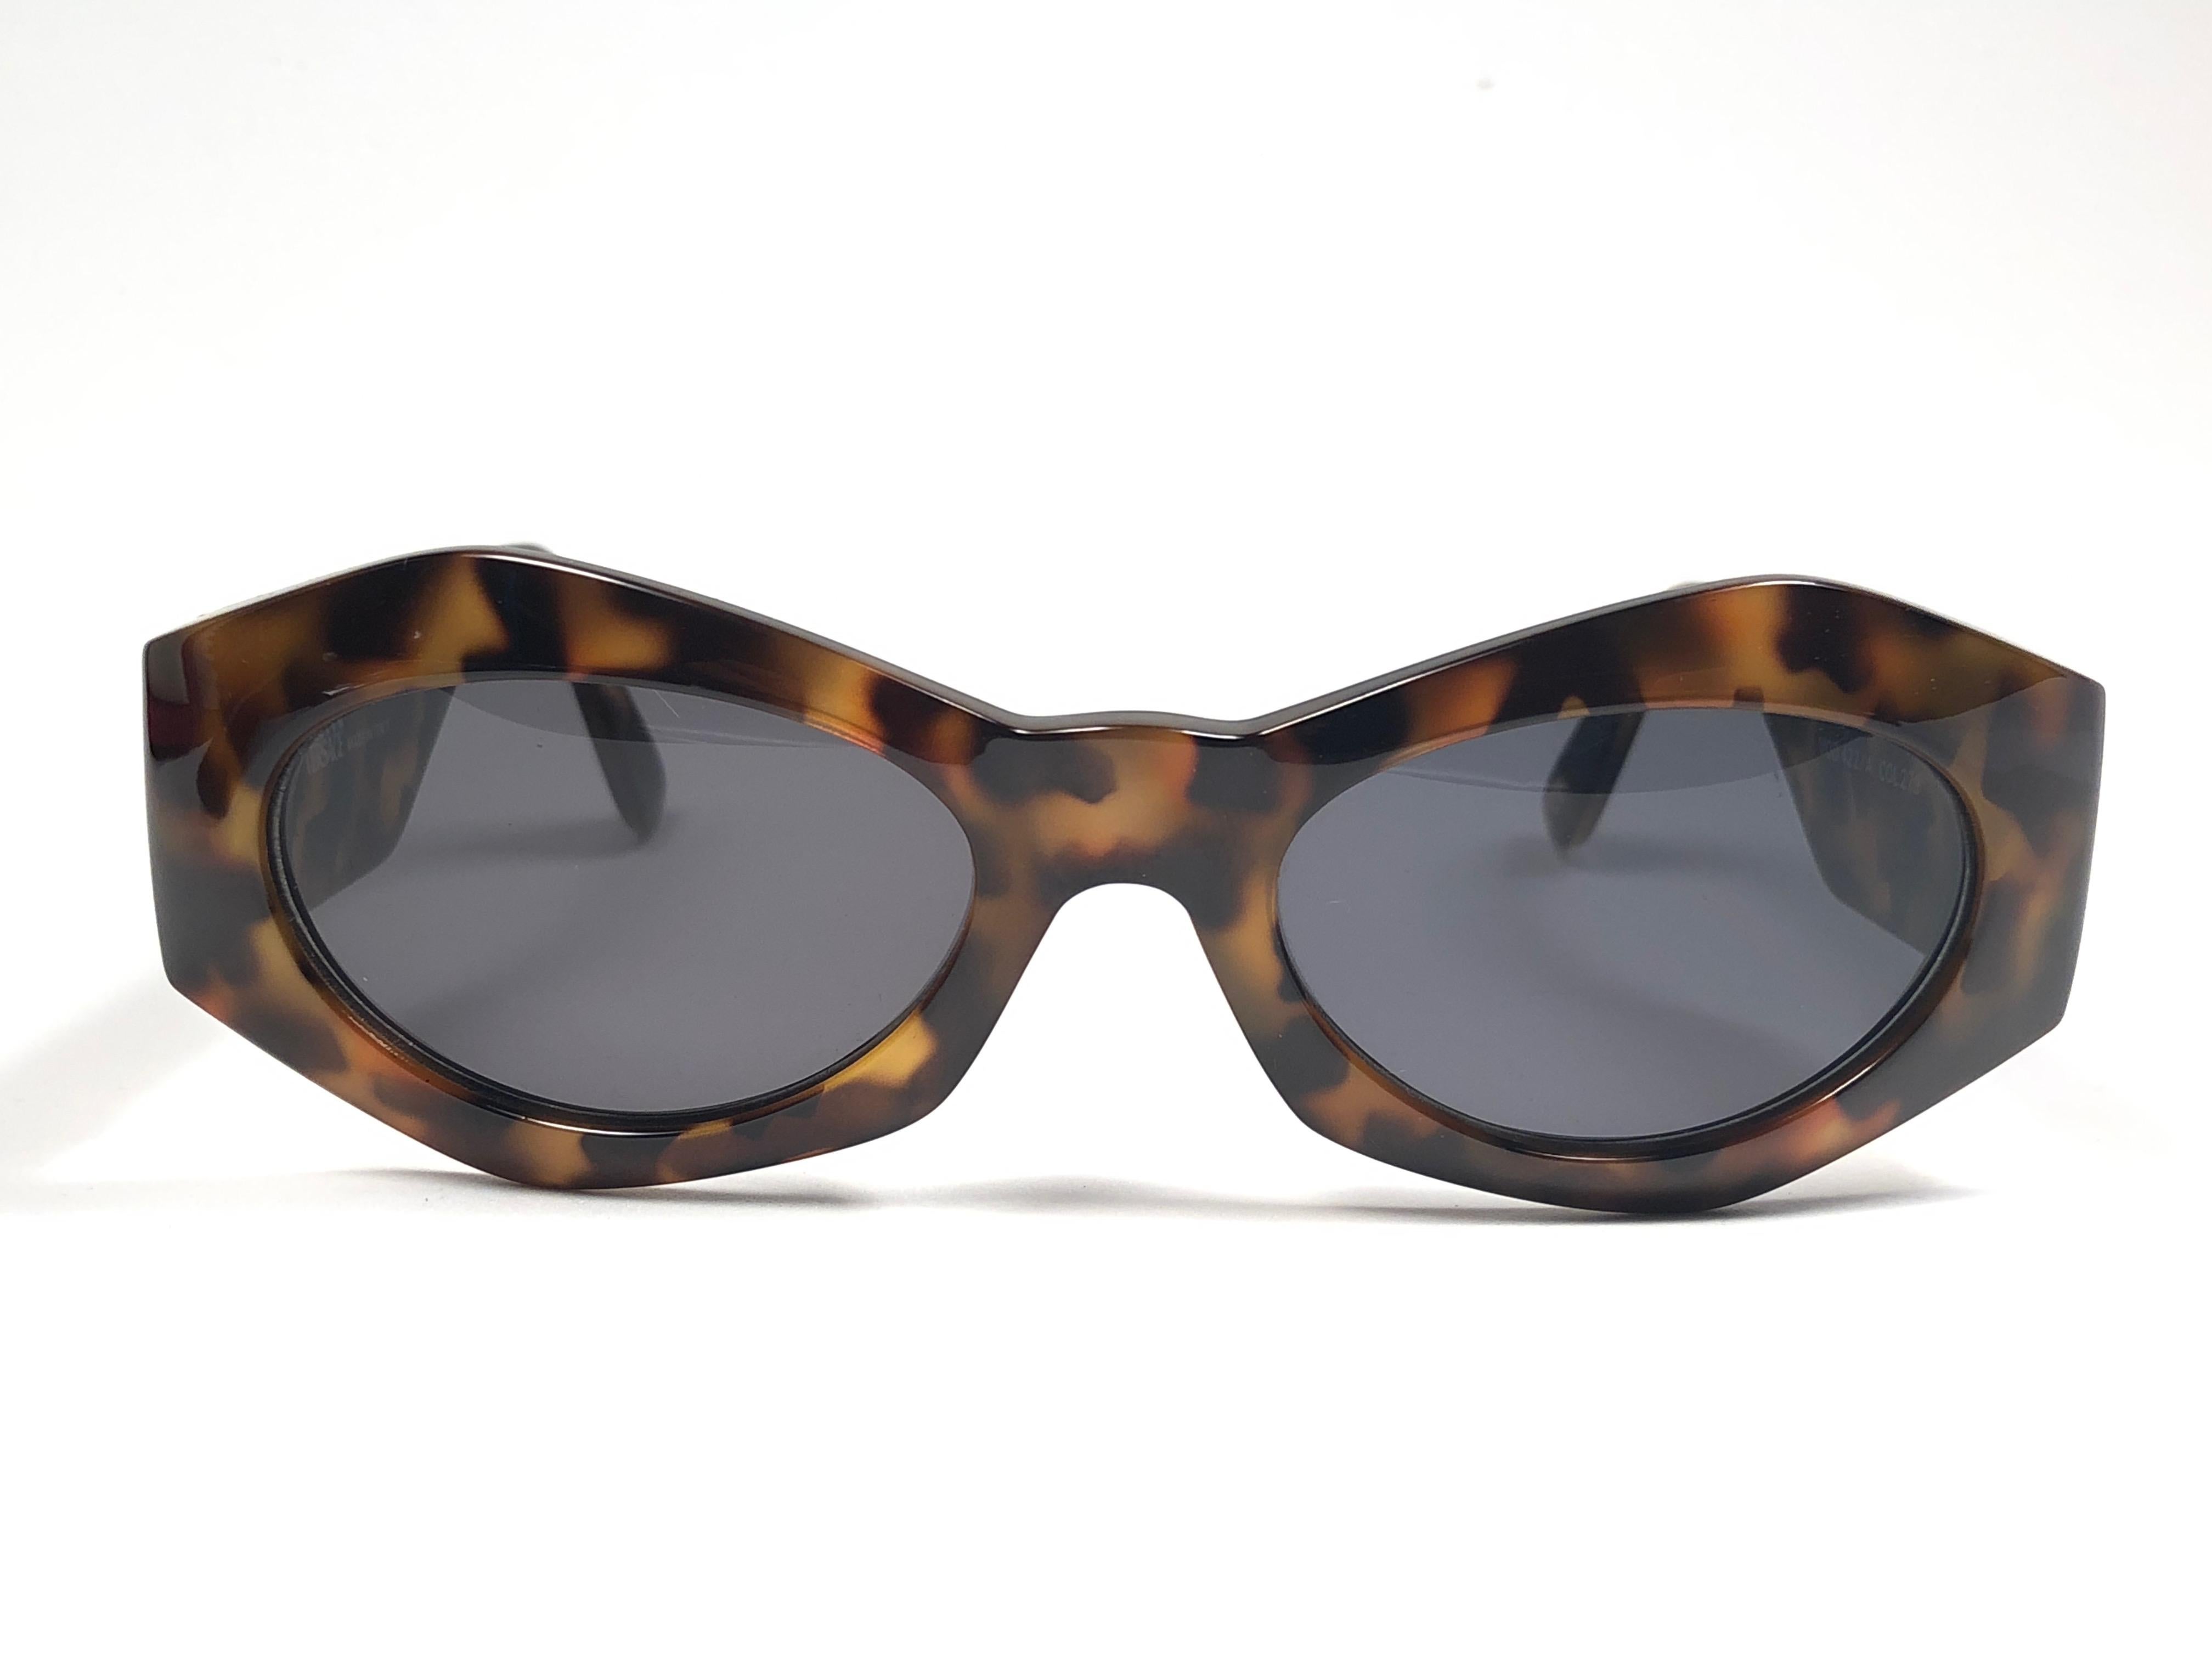 New Vintage Gianni Versace 422 Tortoise Sunglasses 1990's Made in Italy 1